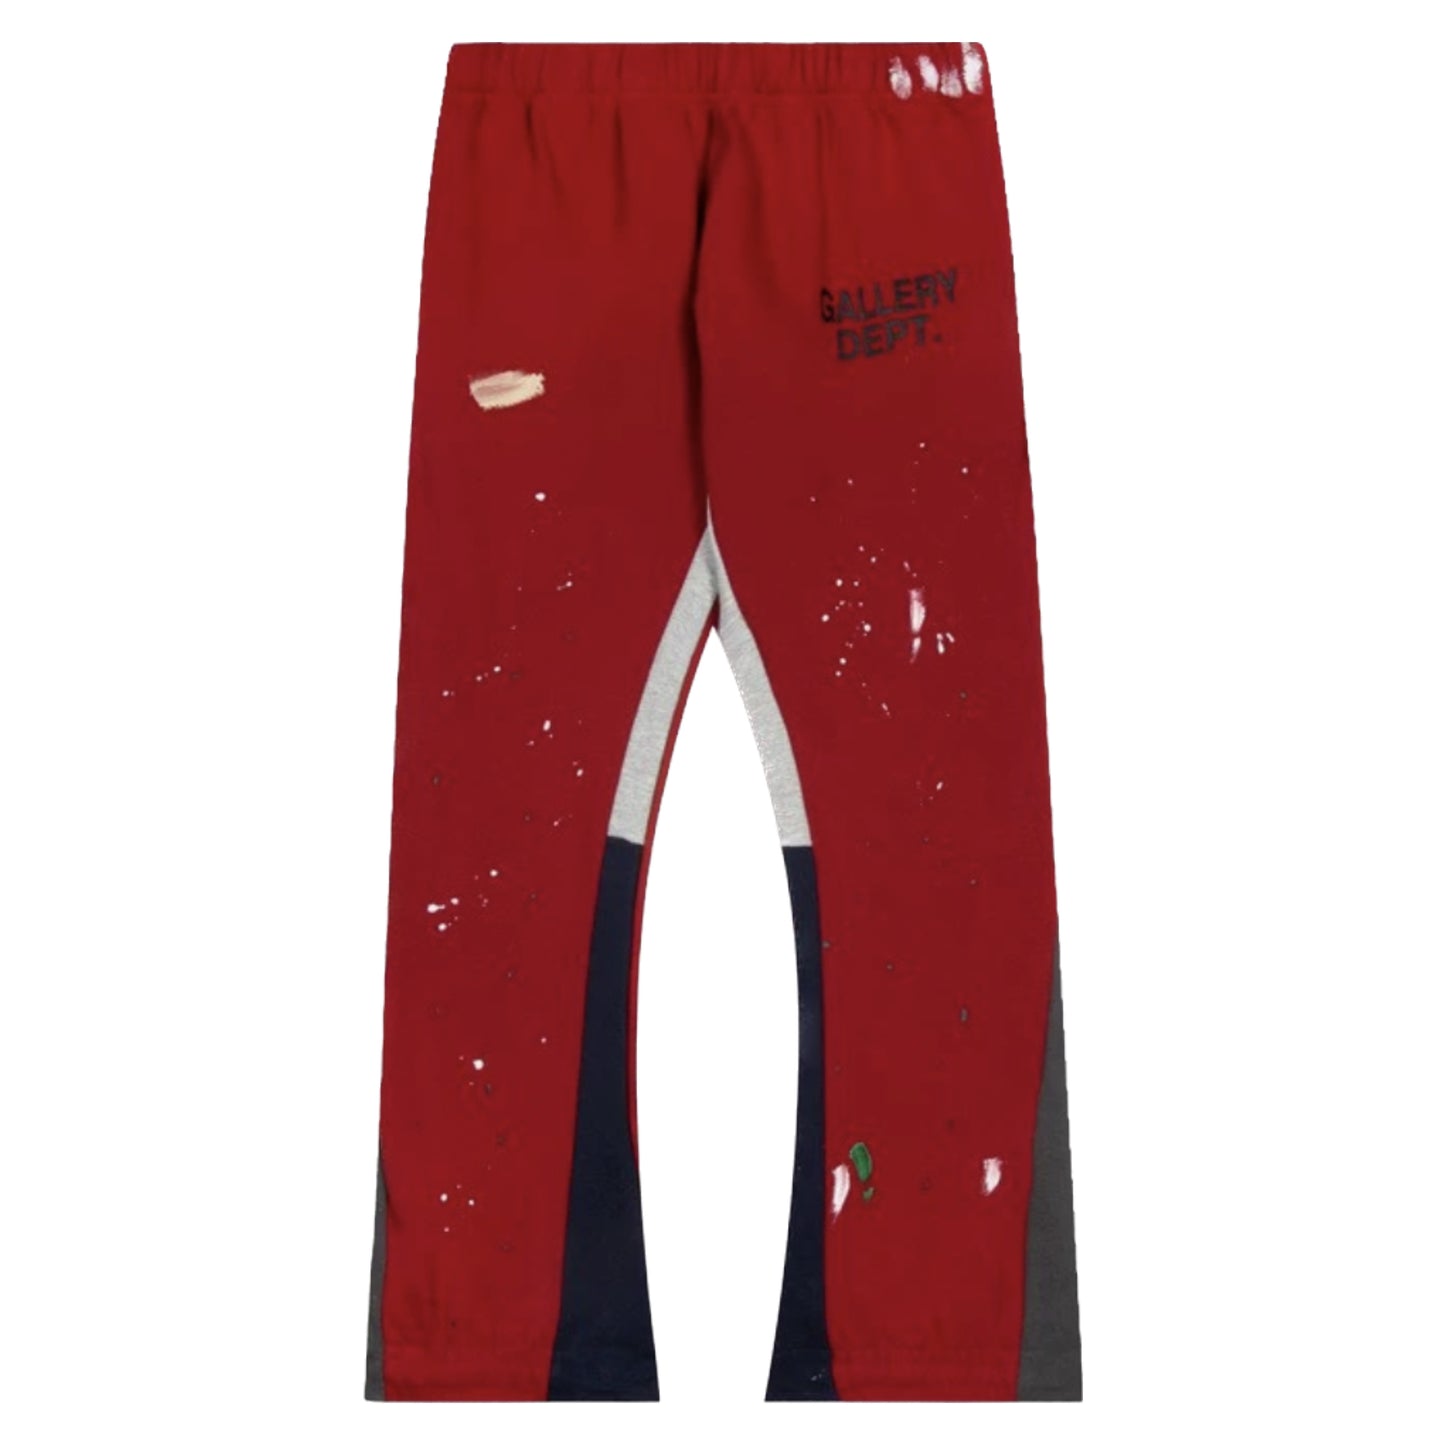 GALLERY DEPT FLARE SWEATS RED